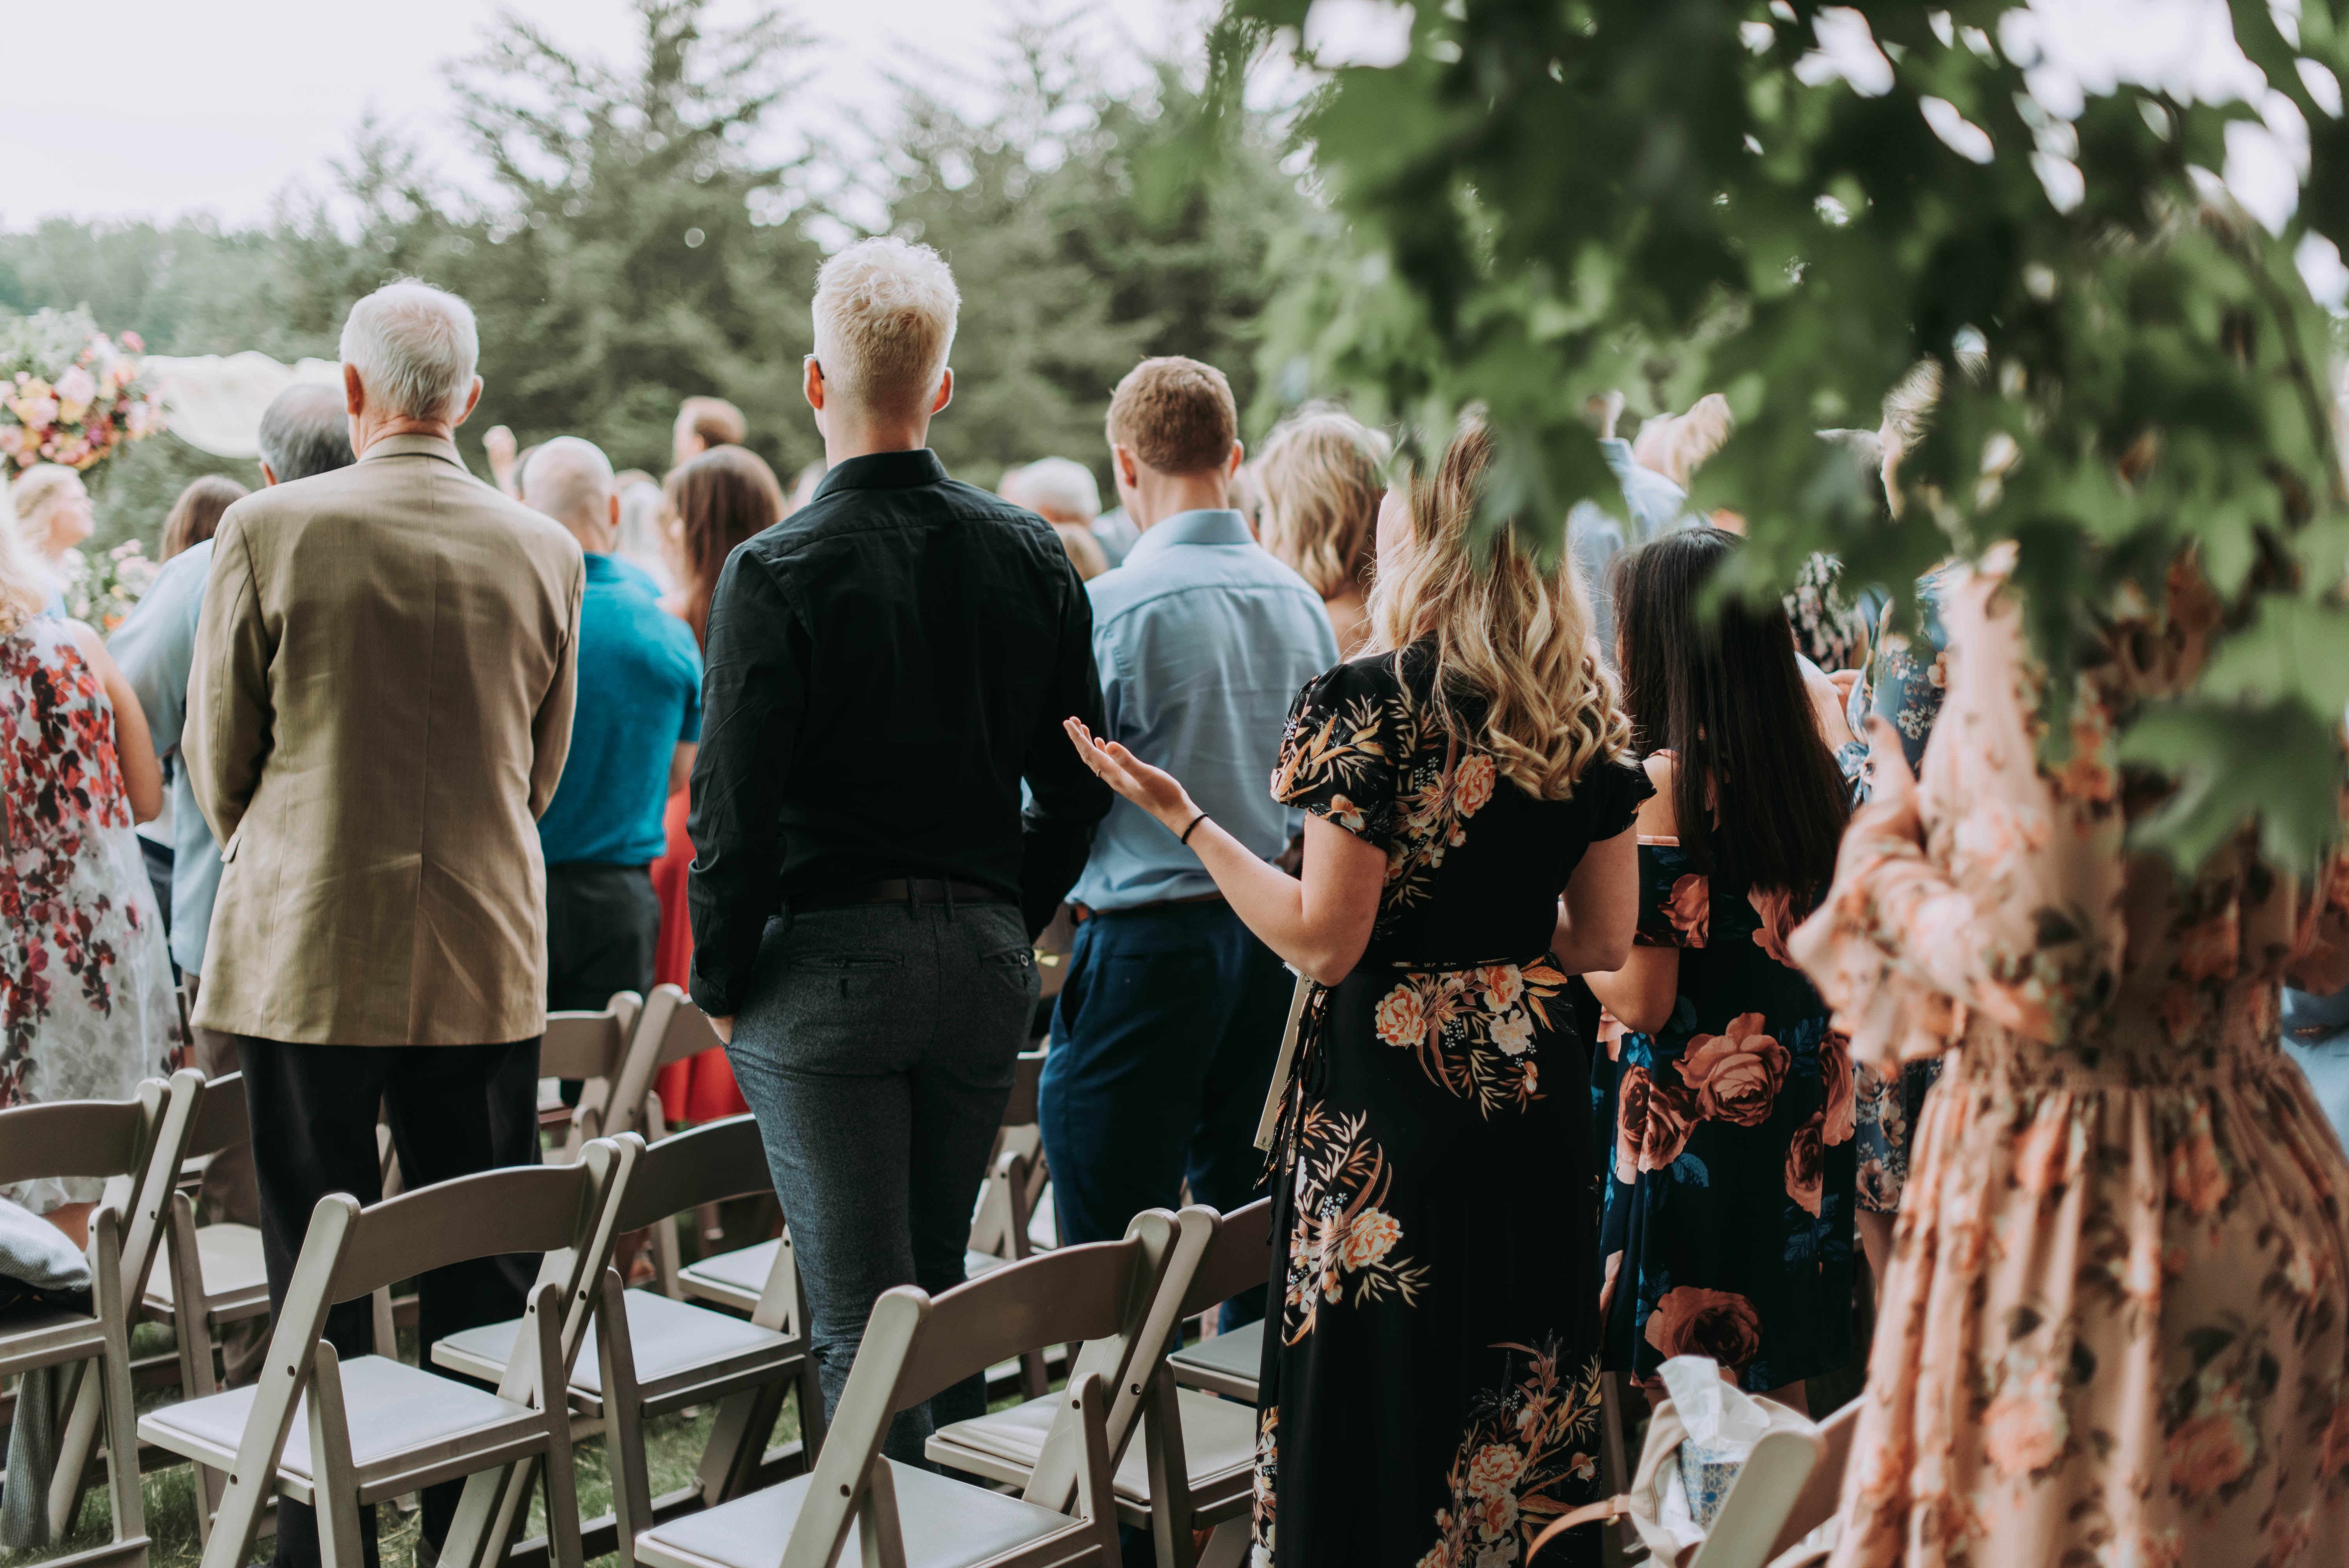 Guests at an outdoor wedding ceremony, standing and facing forward, with their attention directed towards the event, showcasing a variety of elegant attire in a serene, tree-lined setting.